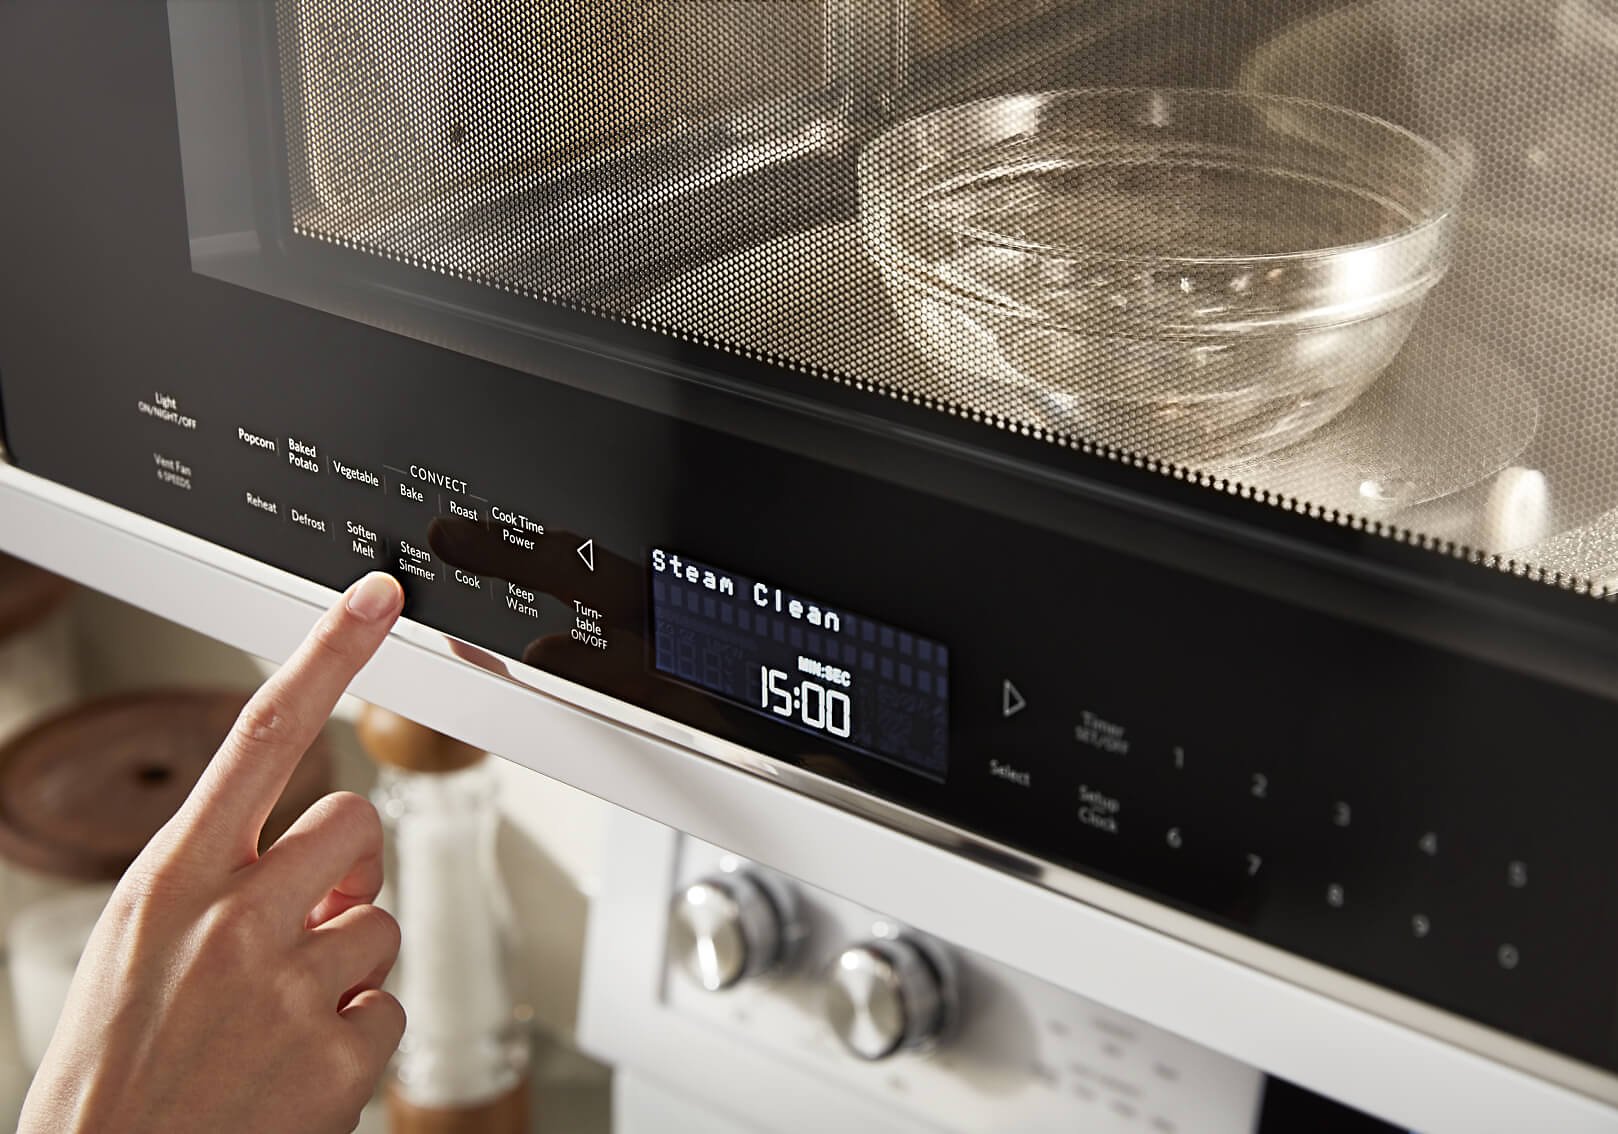 How to Clean a Microwave (3 Ways)